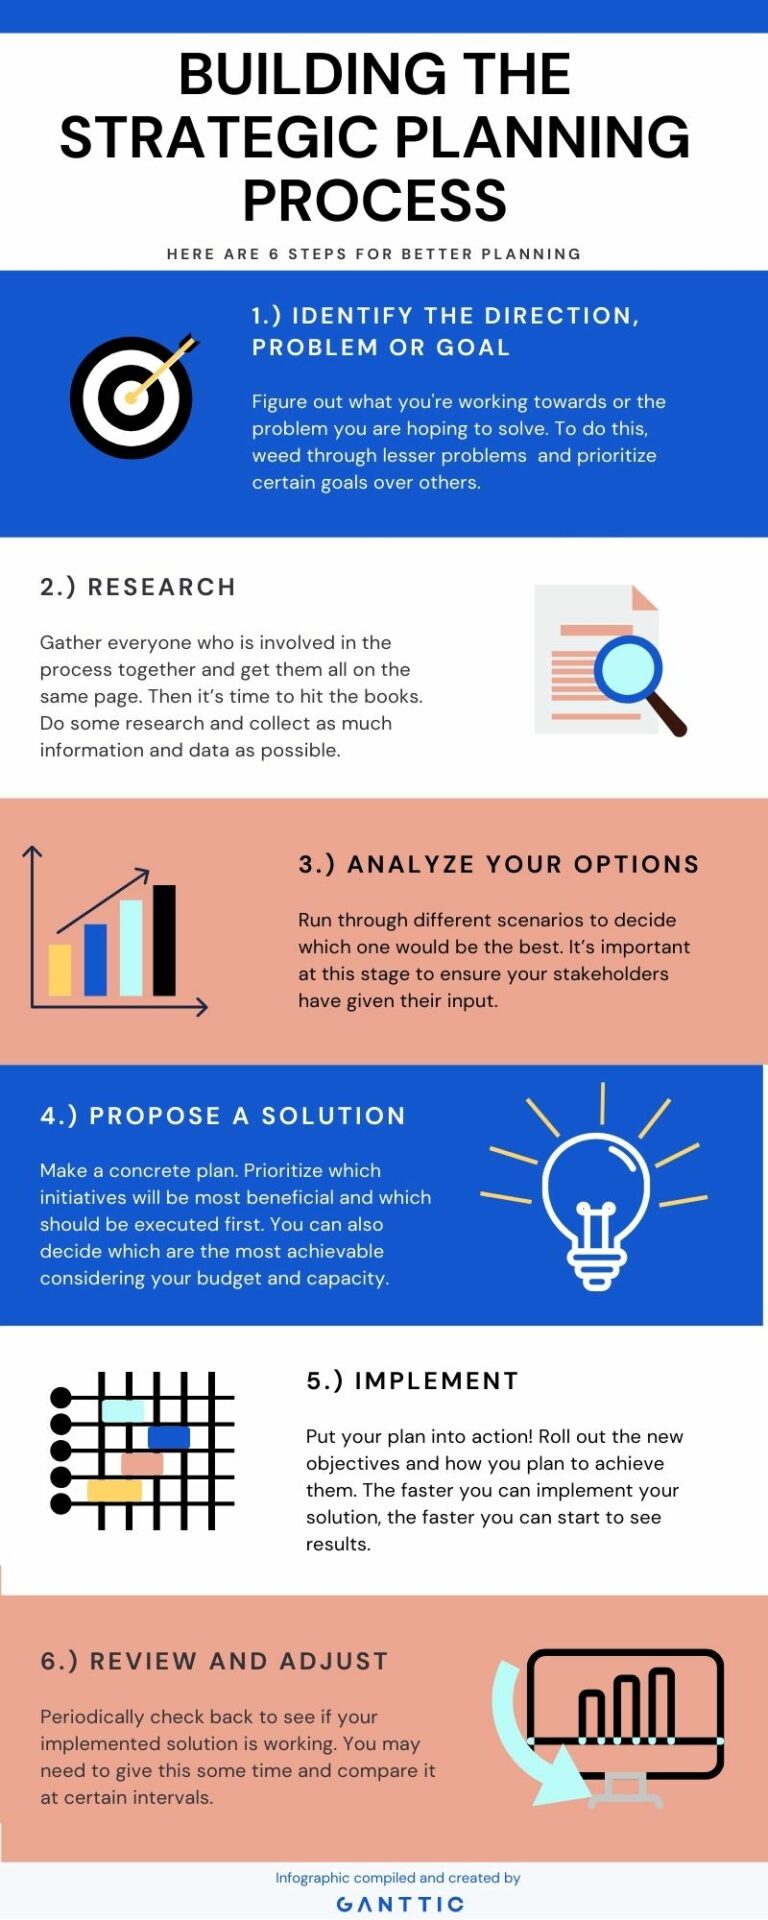 infographic for the 6 steps of building a strategic planning process. 